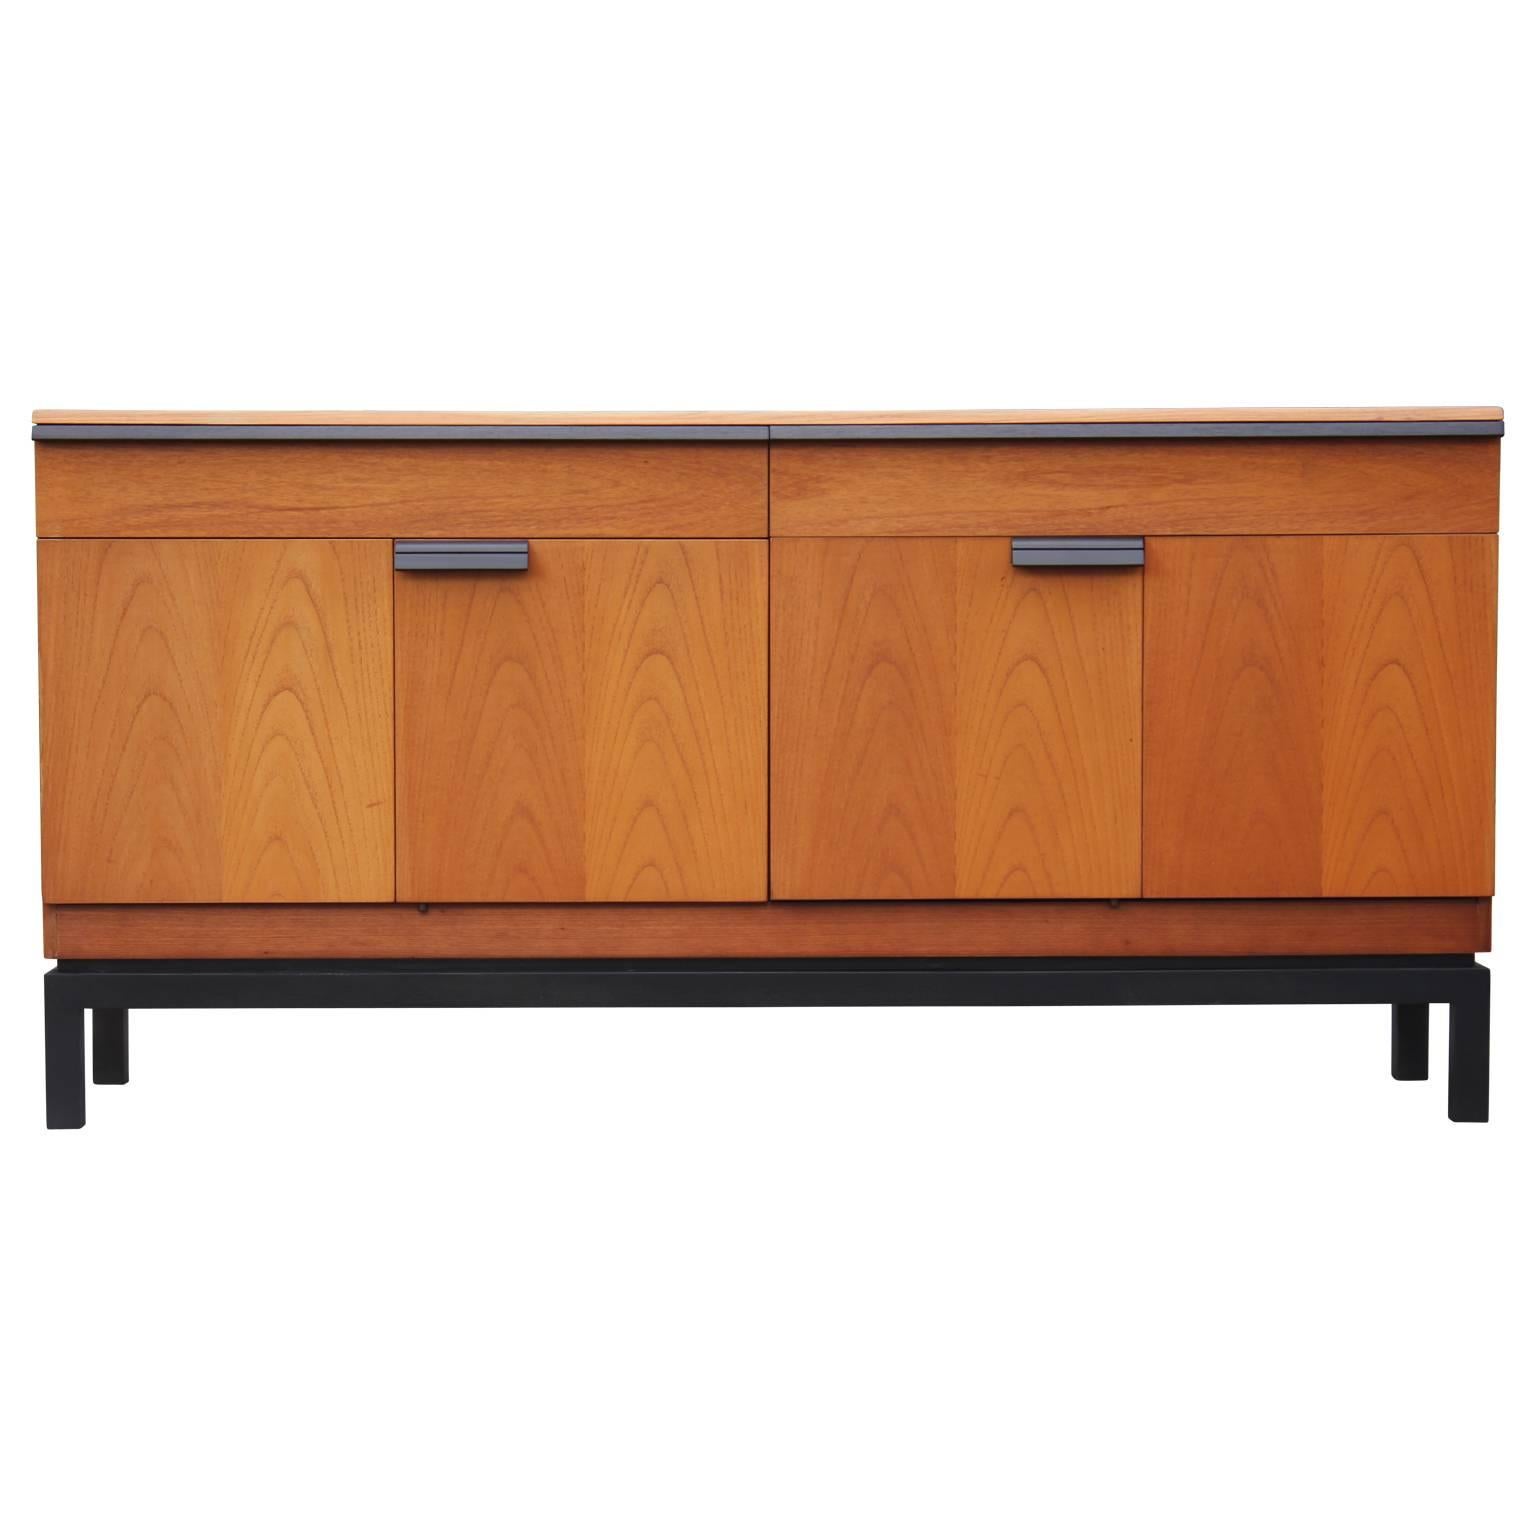 Lovely modern teak two-toned sideboard made in the 1960s. Piece is equipped with two top drawers as well as two larger cabinets with shelves on the bottom. The sideboard has ebony stained handles as well as an ebony stained base.